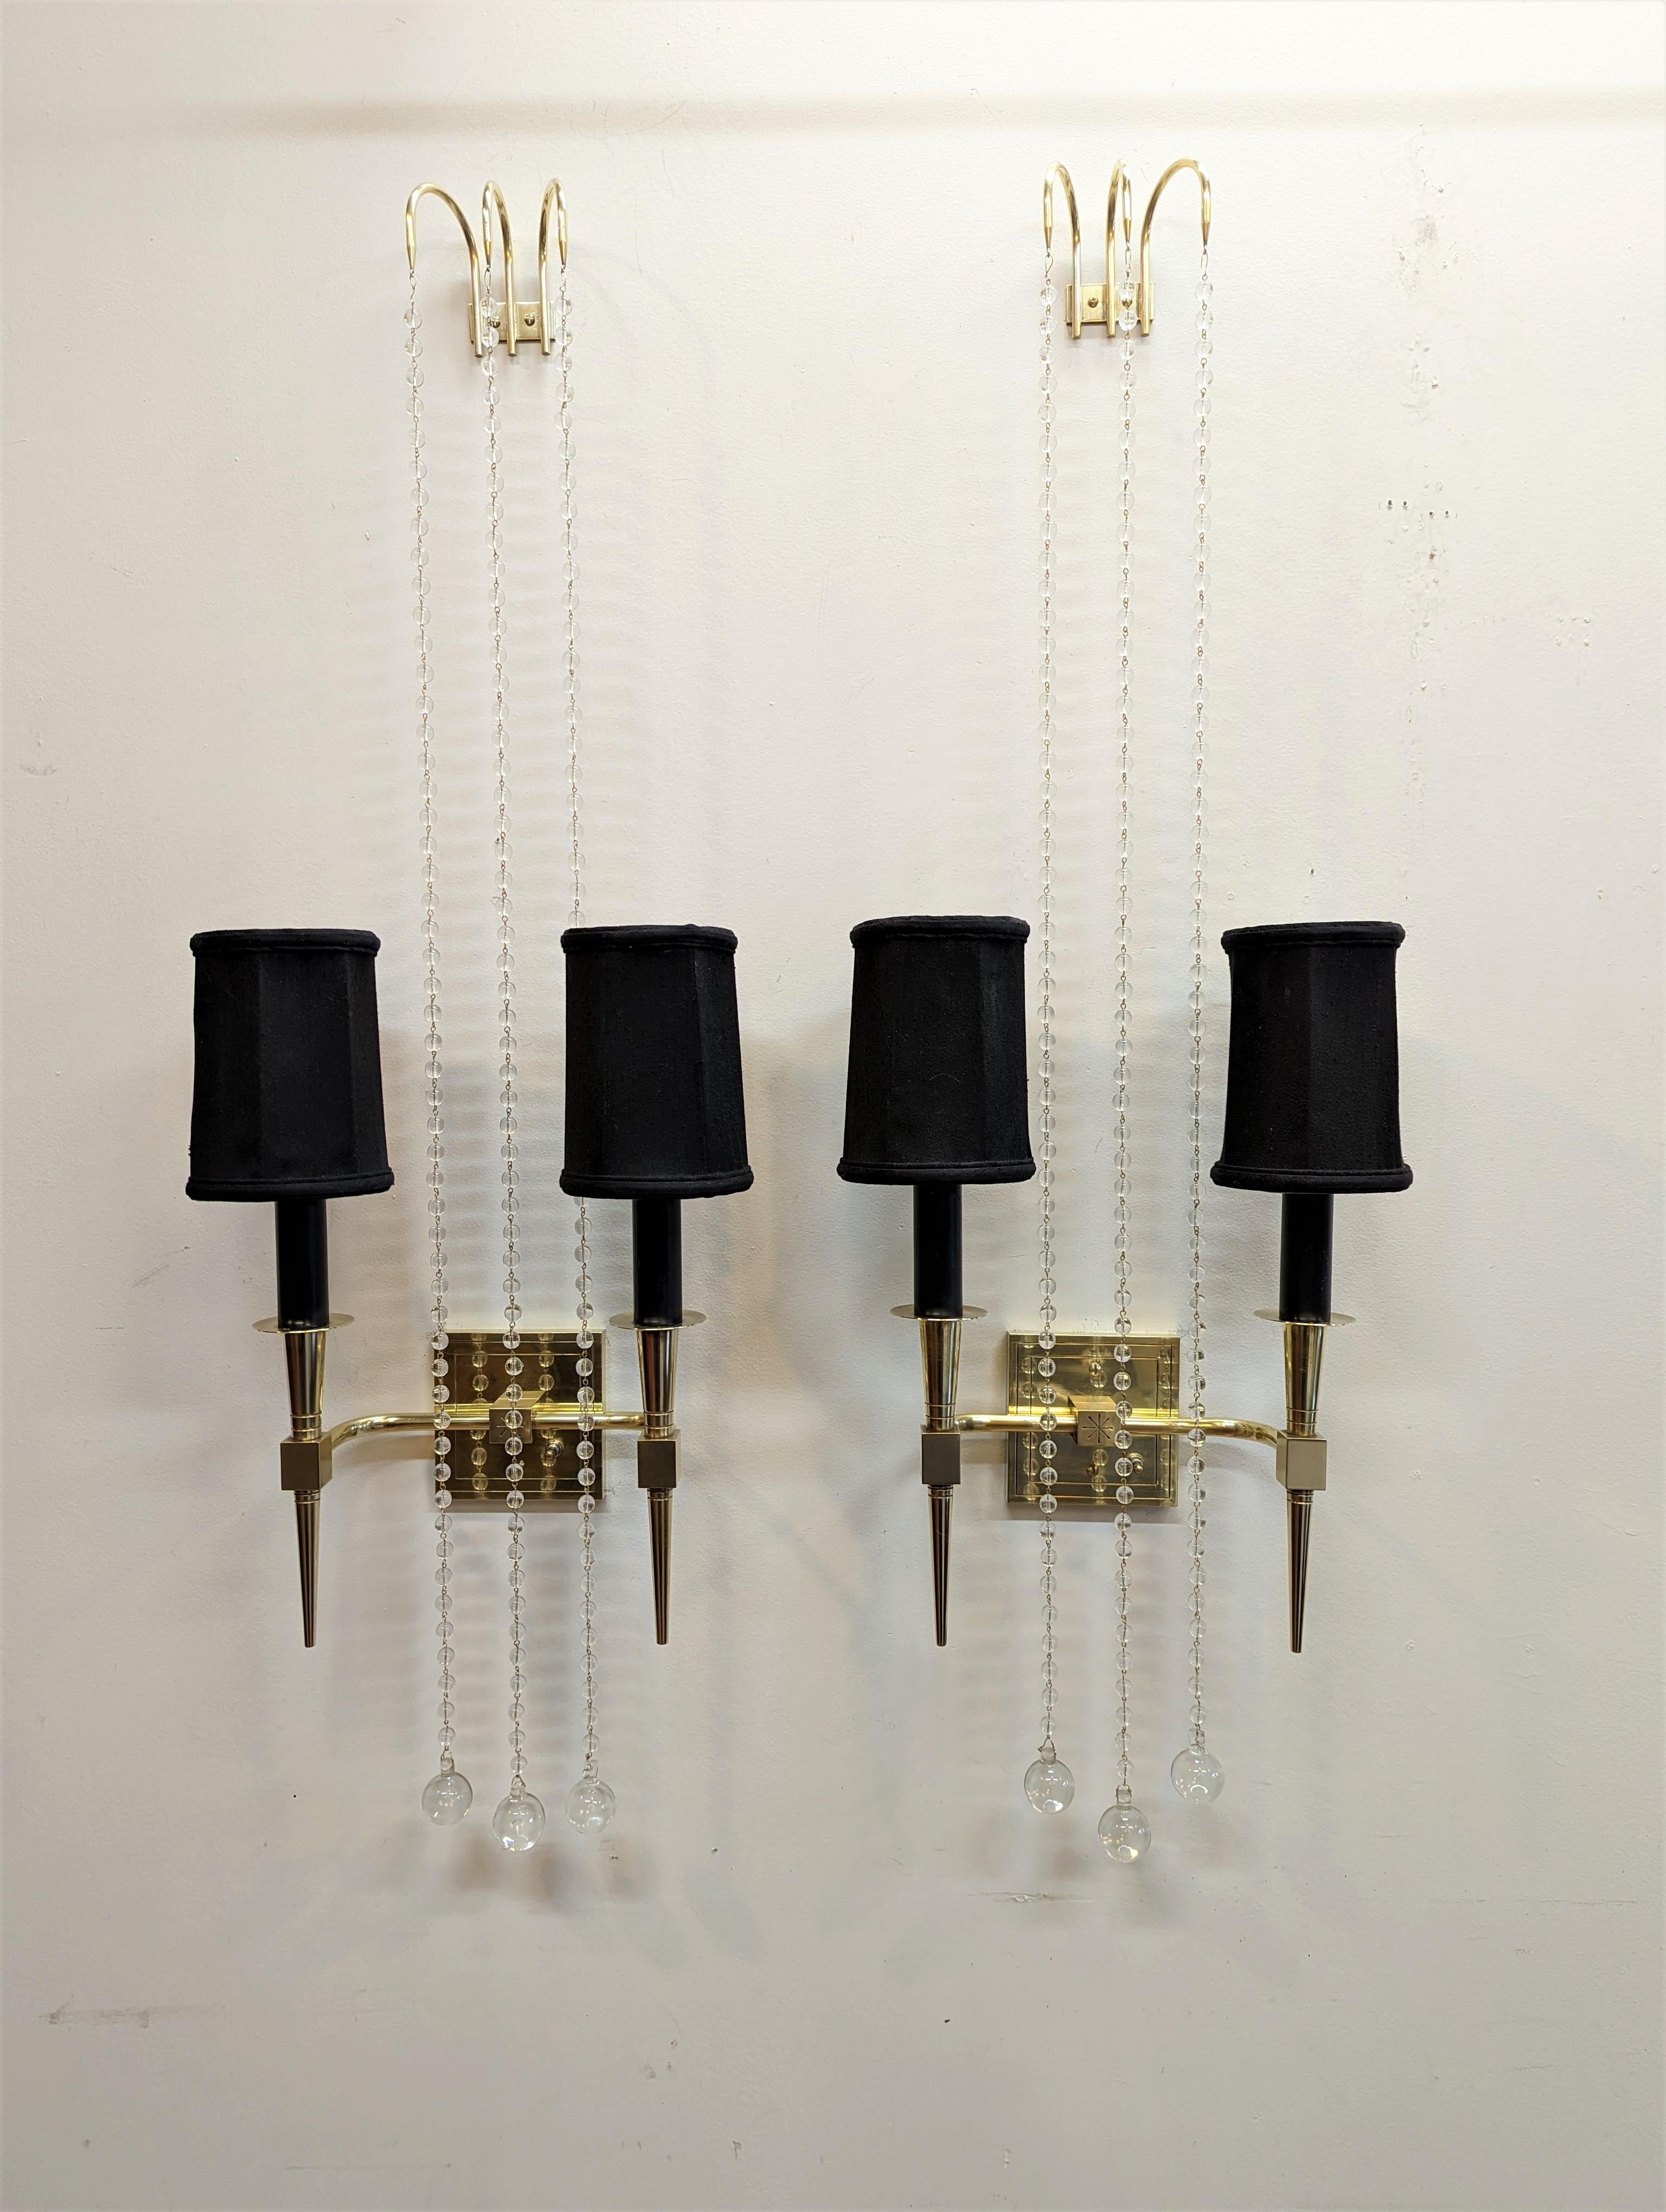 Pair of Tommi Parzinger sconces model no 12 in brass with suspended crystals and silk shades. Very elegant sconces that can be displayed in a couple of different variations. As shown height 46 inches and can be adjusted by adding or removing